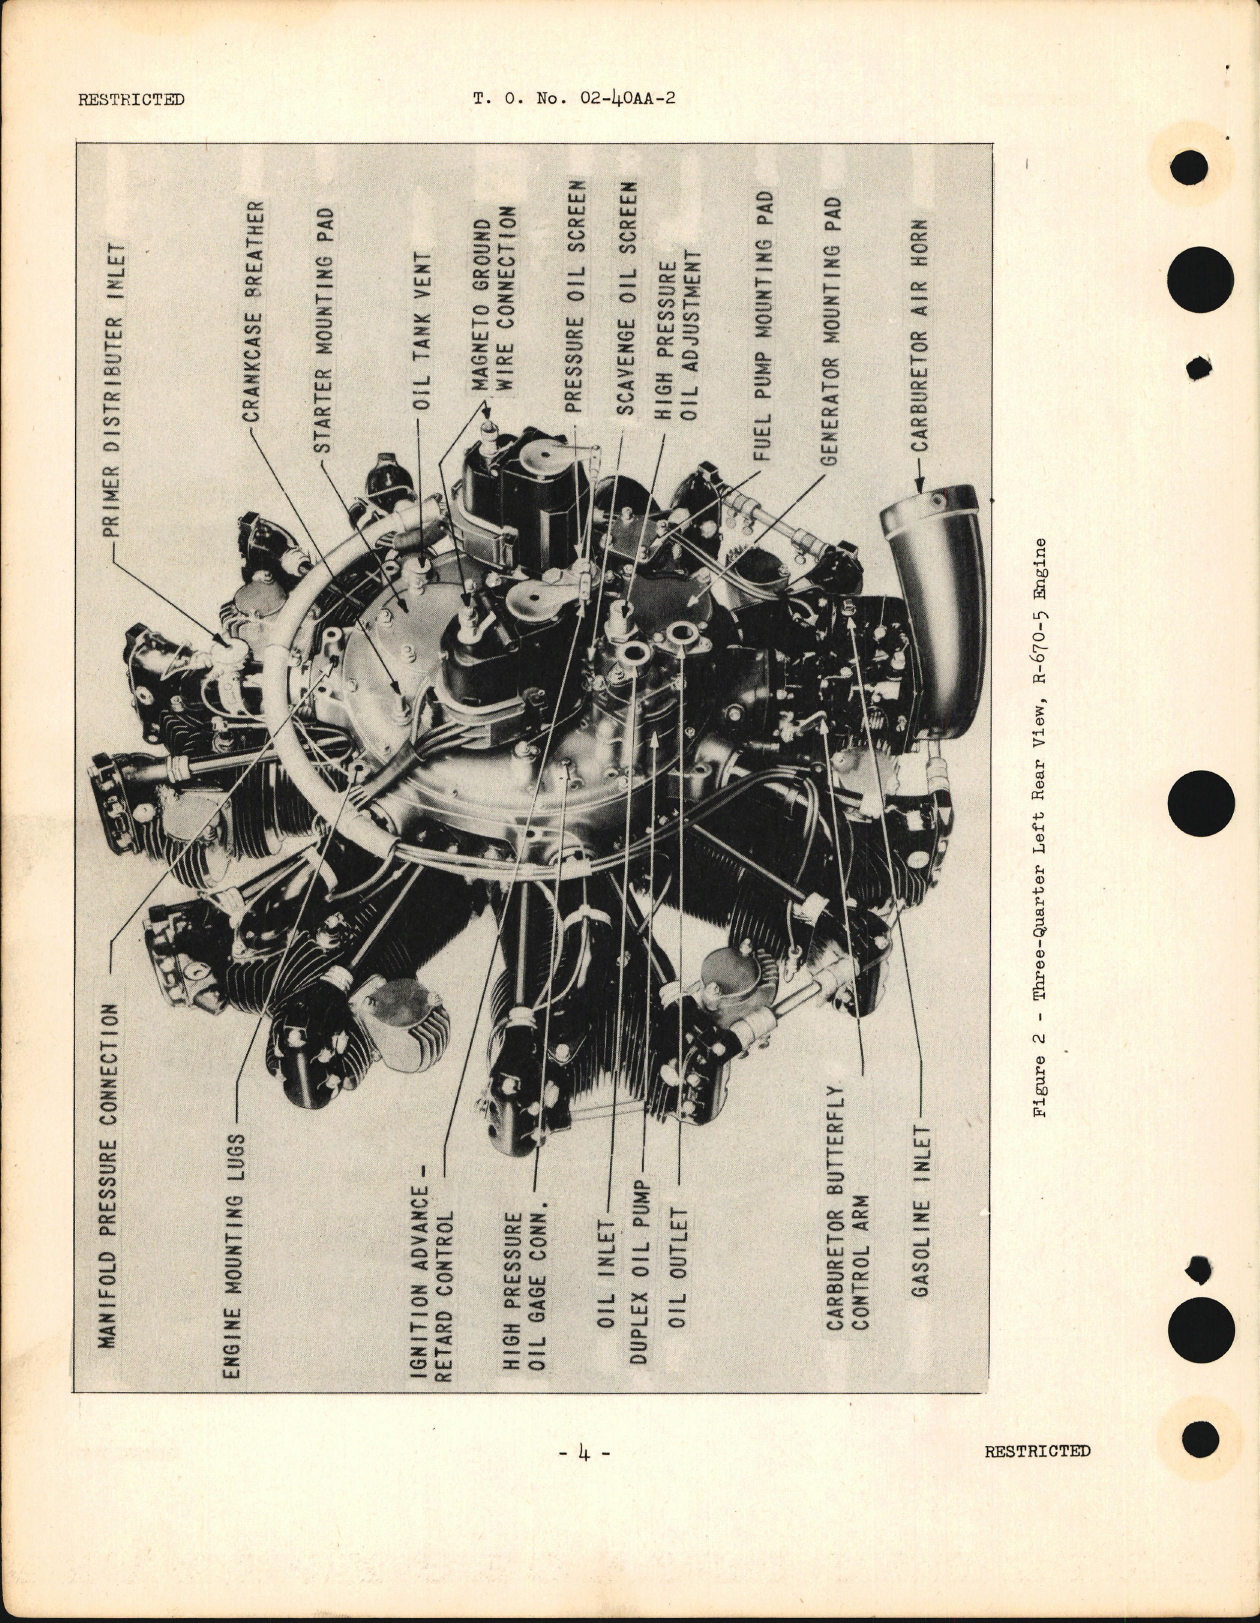 Sample page 6 from AirCorps Library document: Service Instructions for R-670-3, R-670-4, and R-670-5 Engines